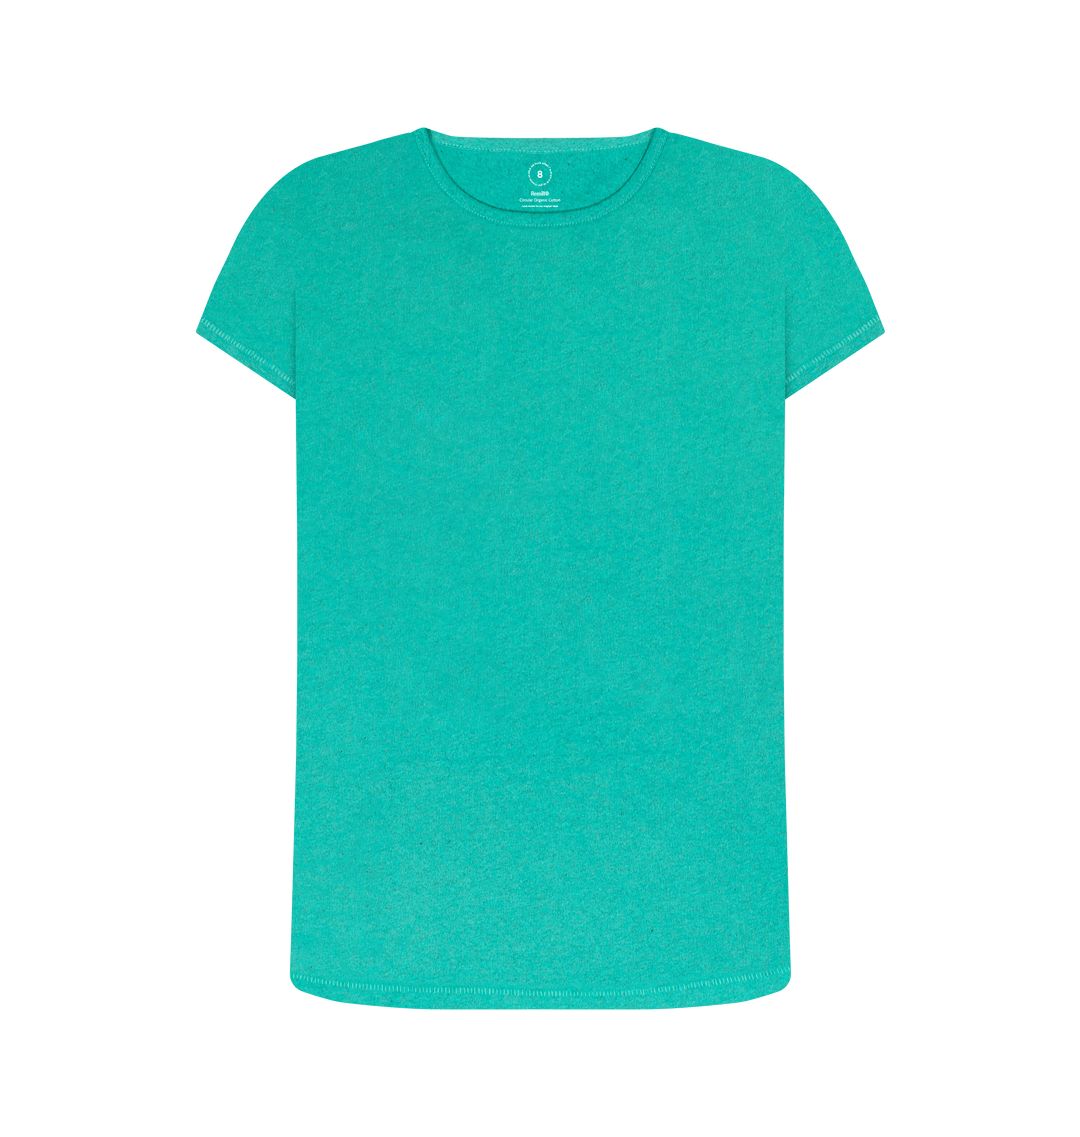 Seagrass Green Women's sustainable essential t-shirt